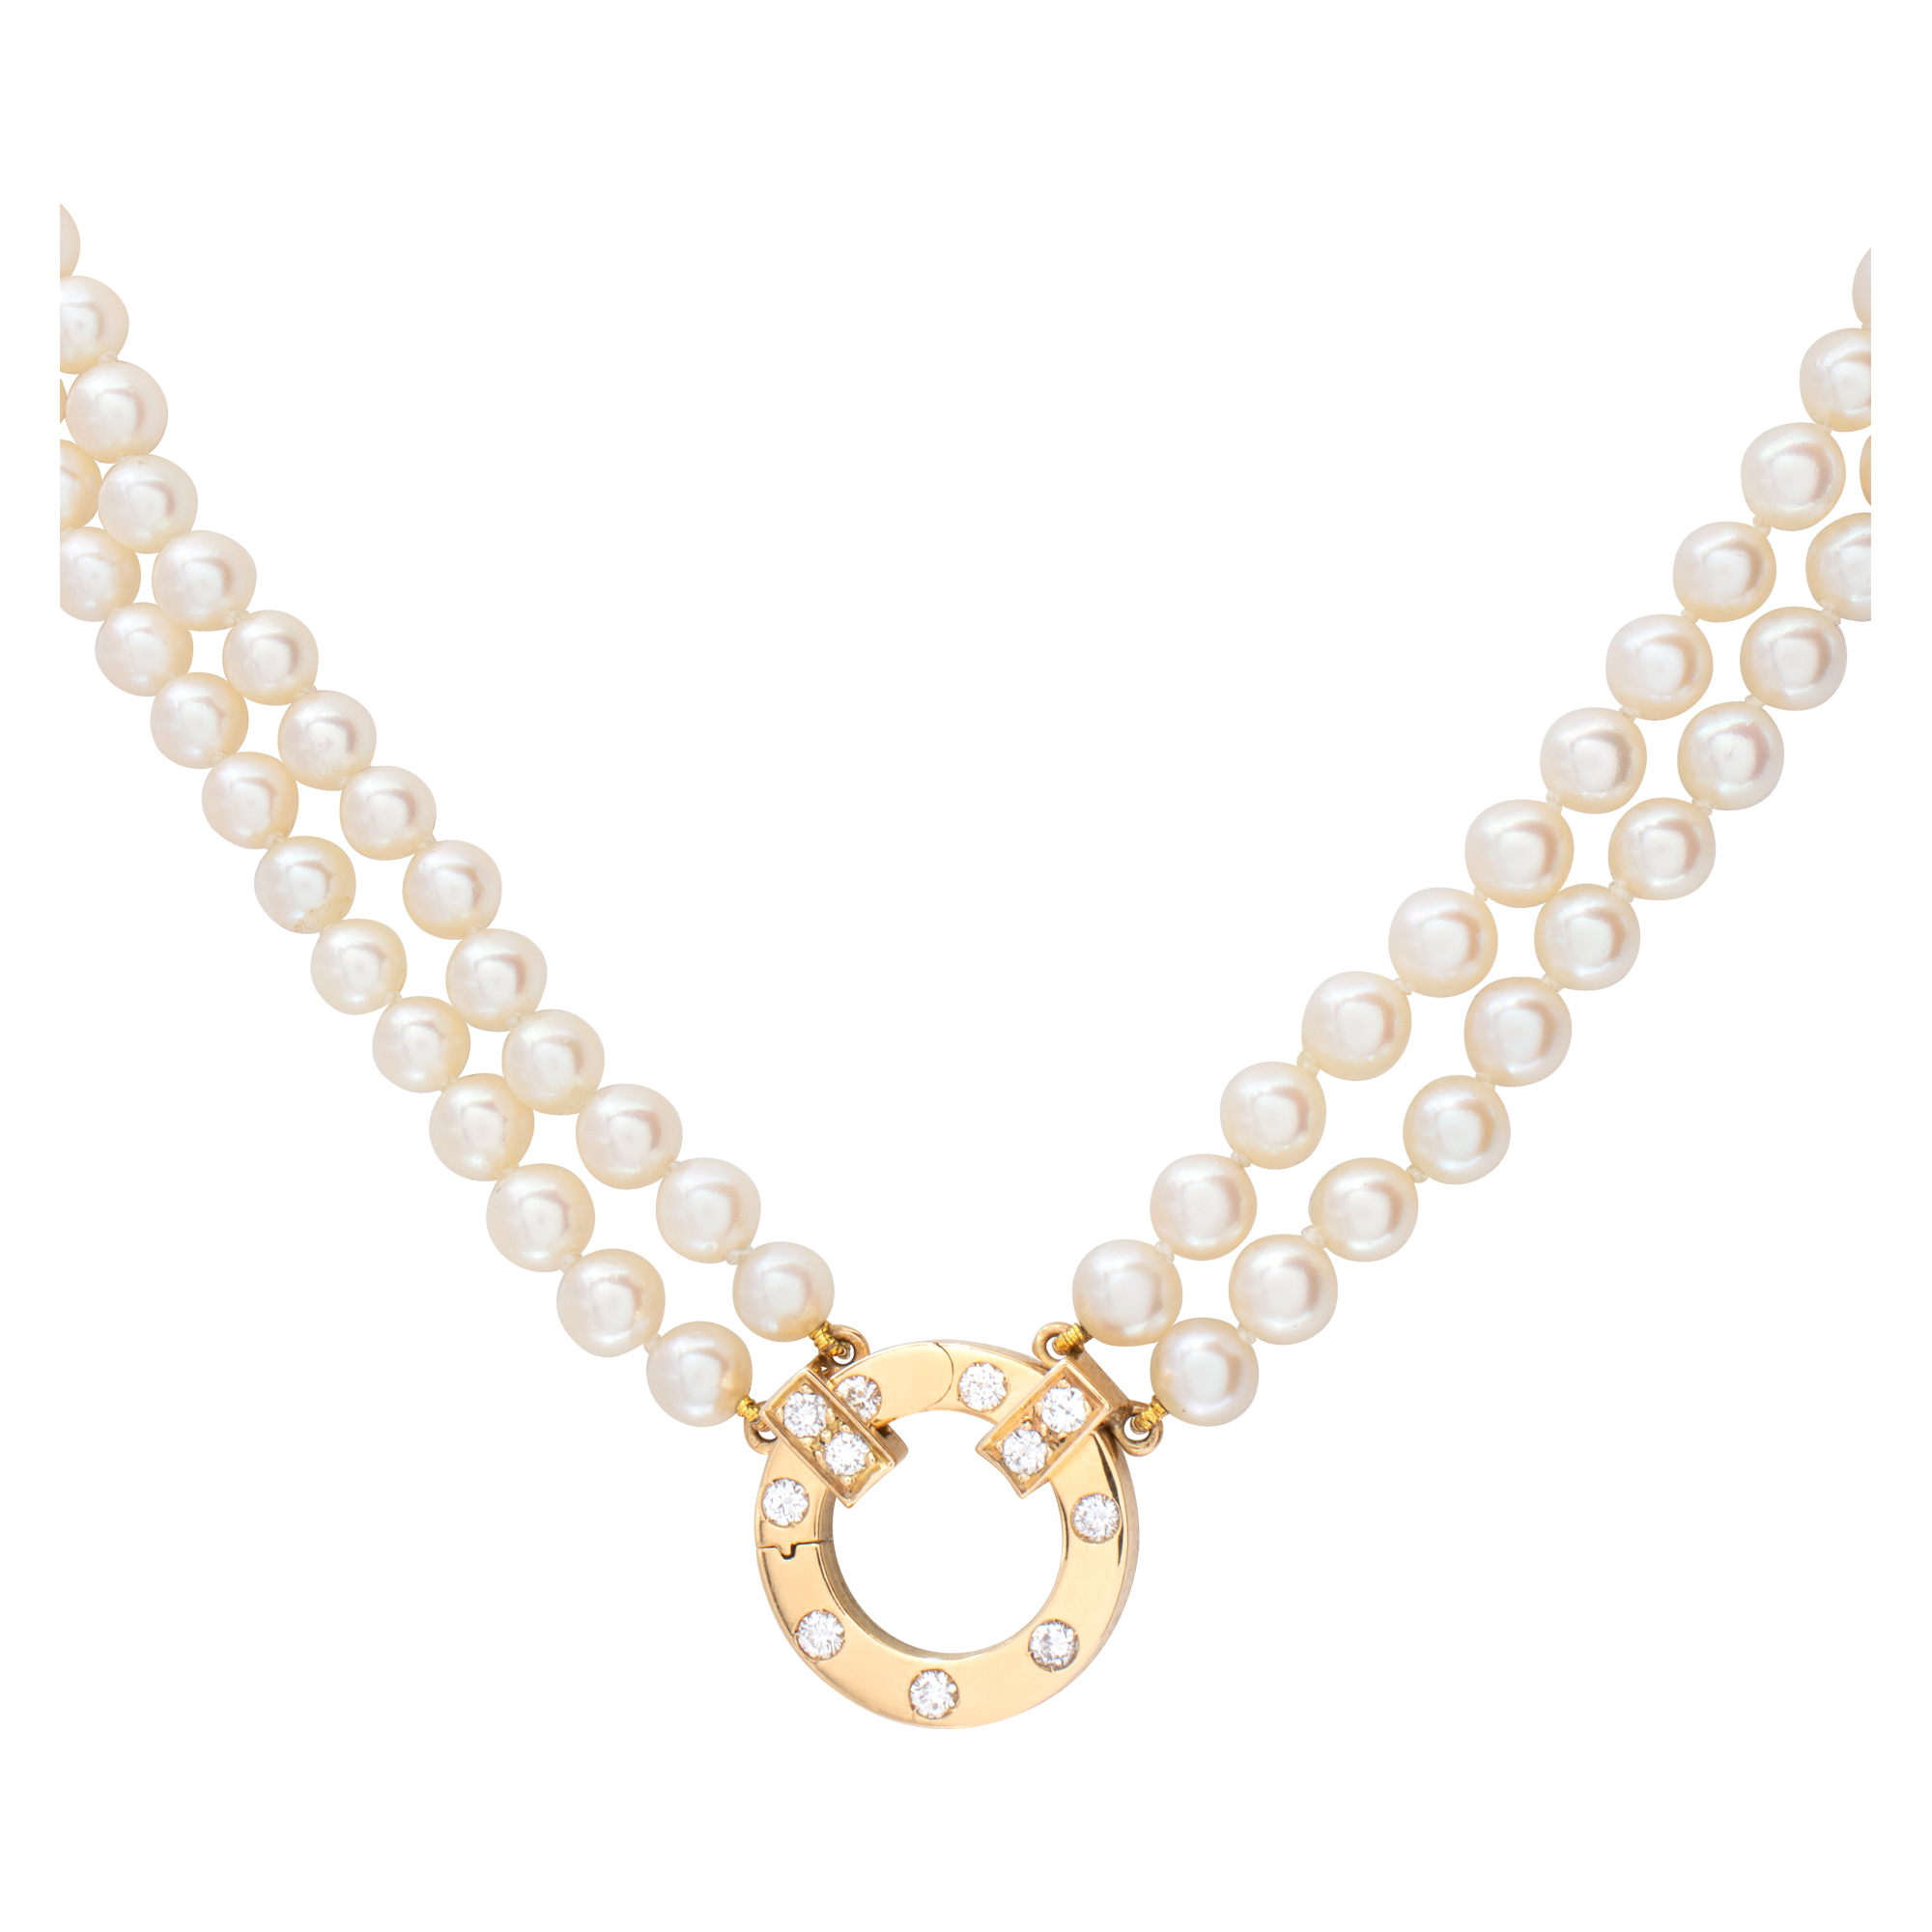 Lovely double strands pearl necklace with 18K gold & diamonds designer clasp, signed "FI" clasp - 16". . image 1